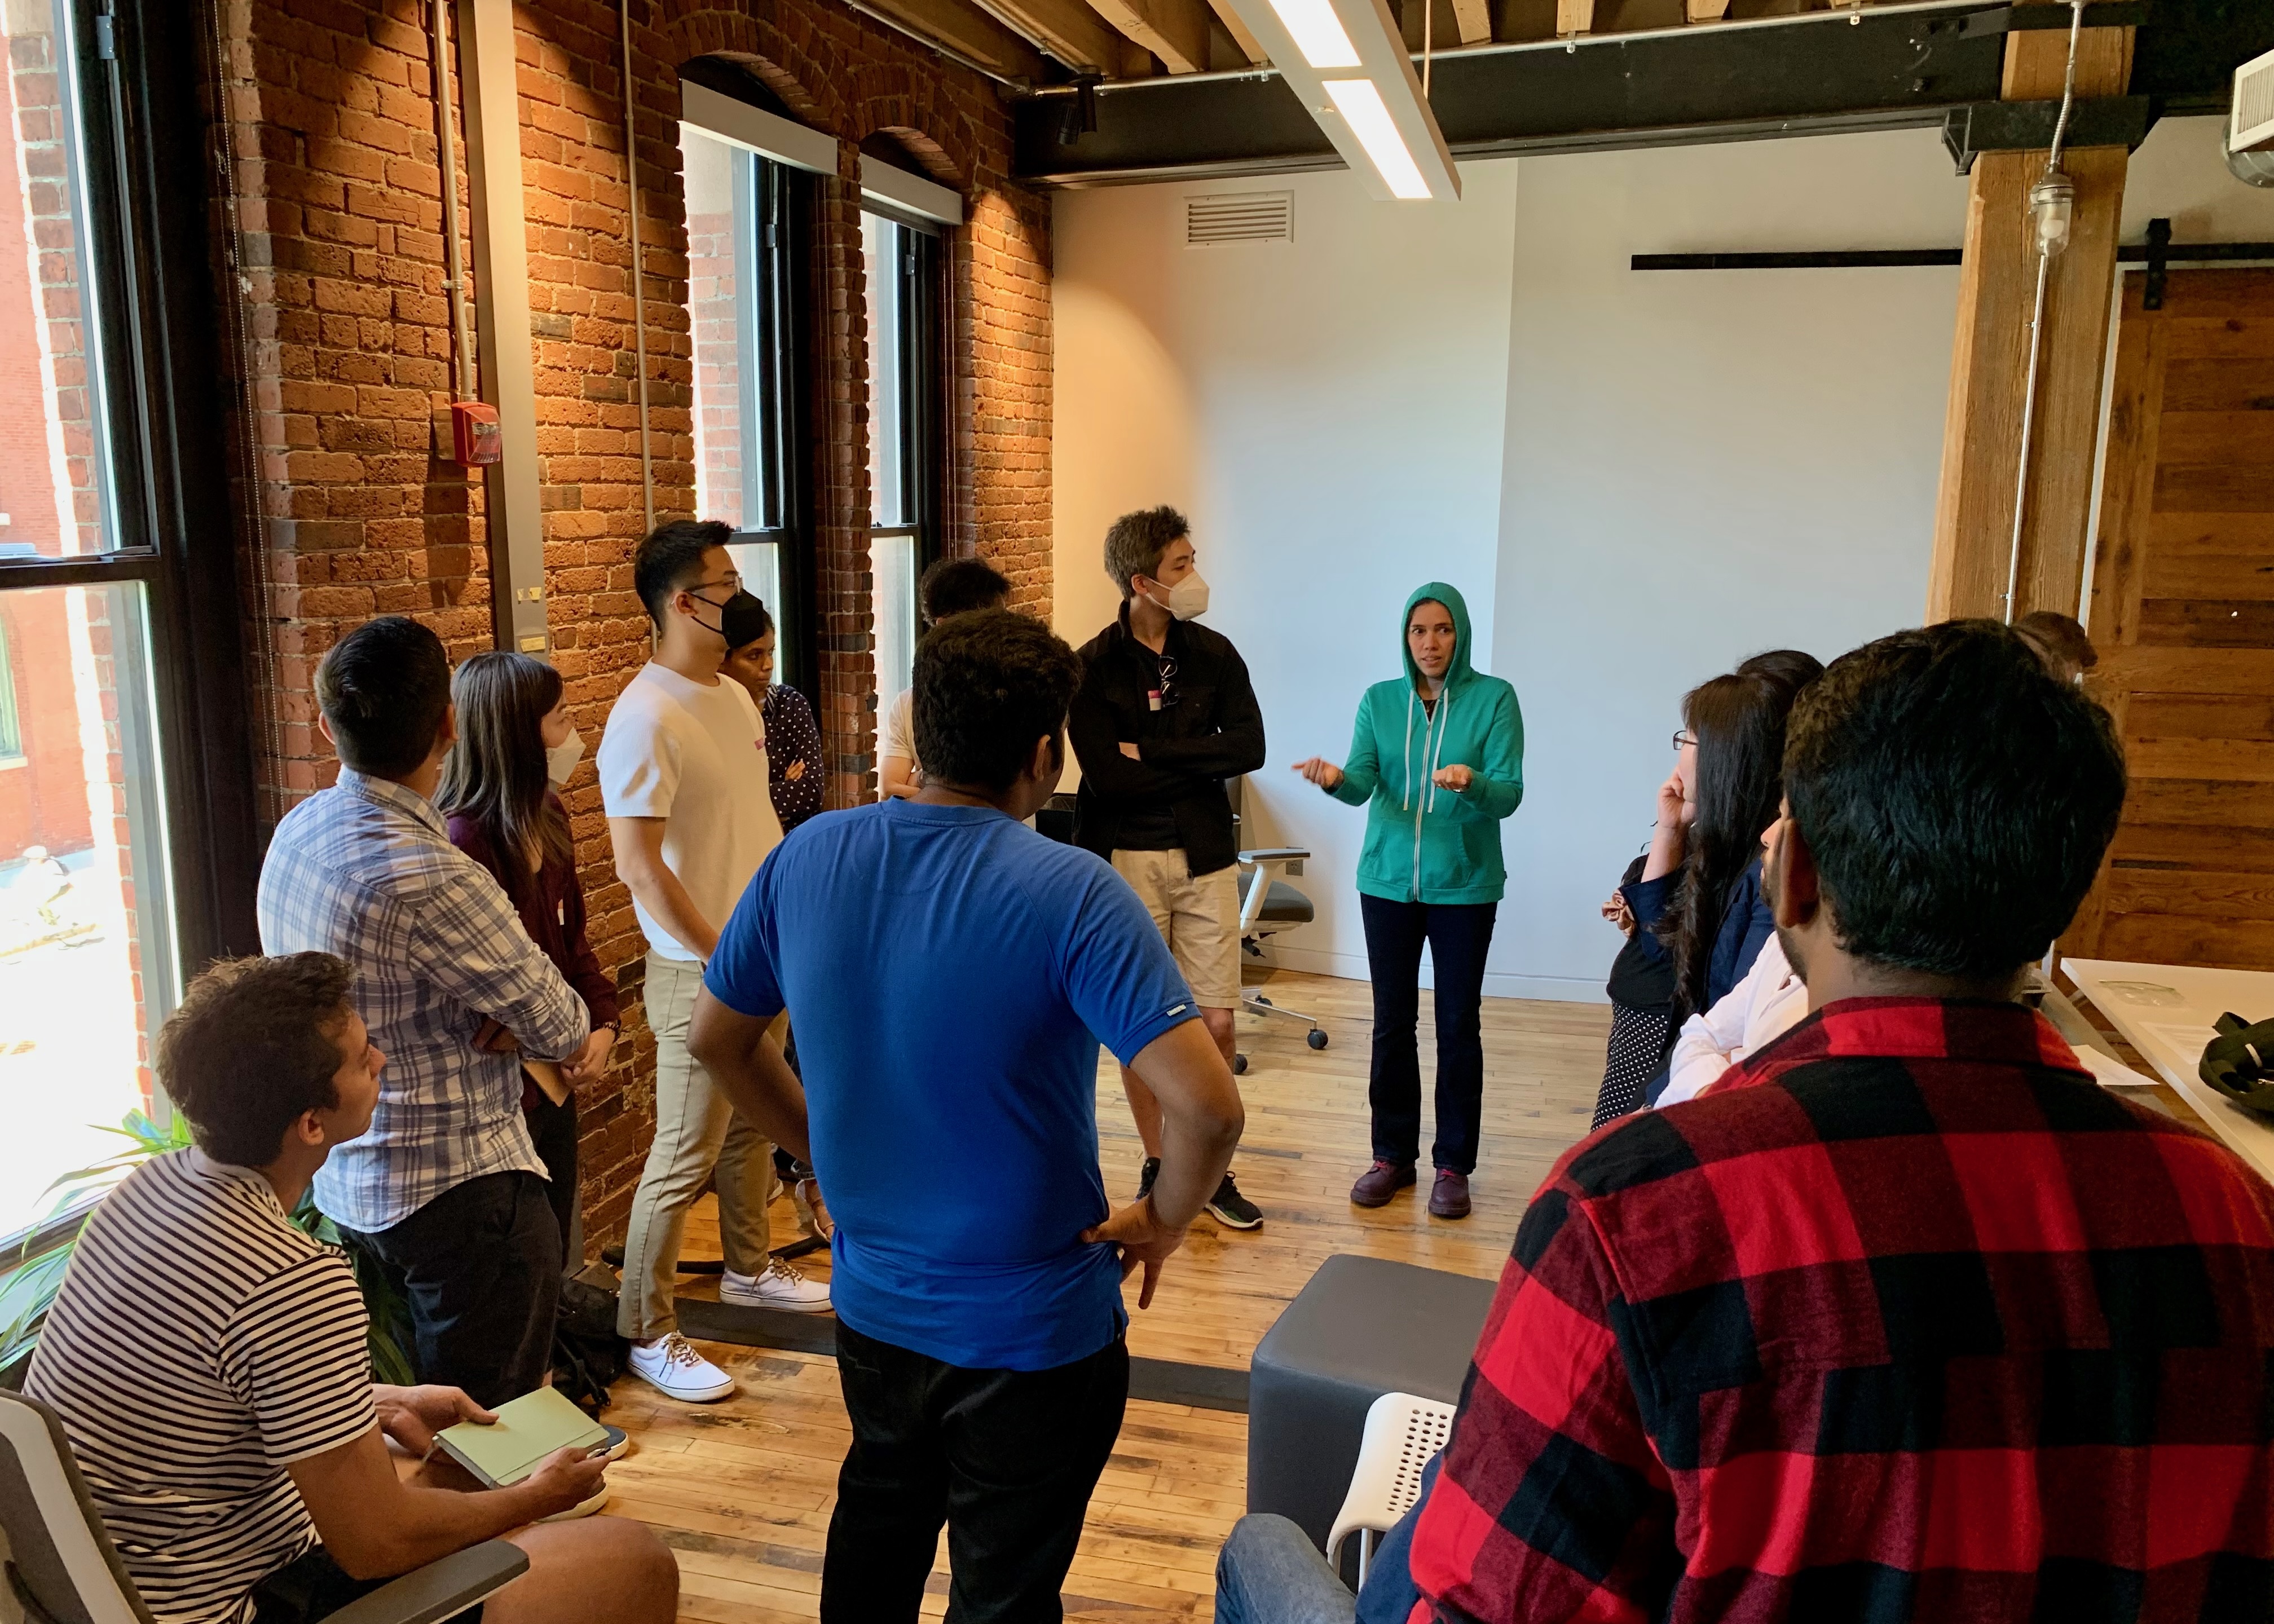 Cohere team members "holding court" with woman leading discussion